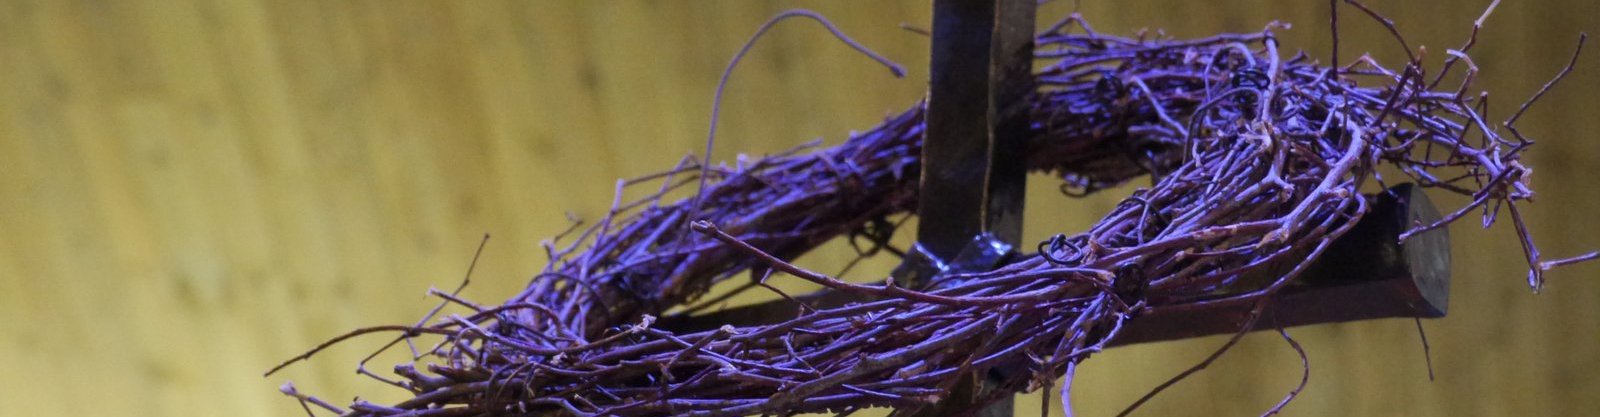 Ash Wednesday Service, 6:30 p.m. March 1